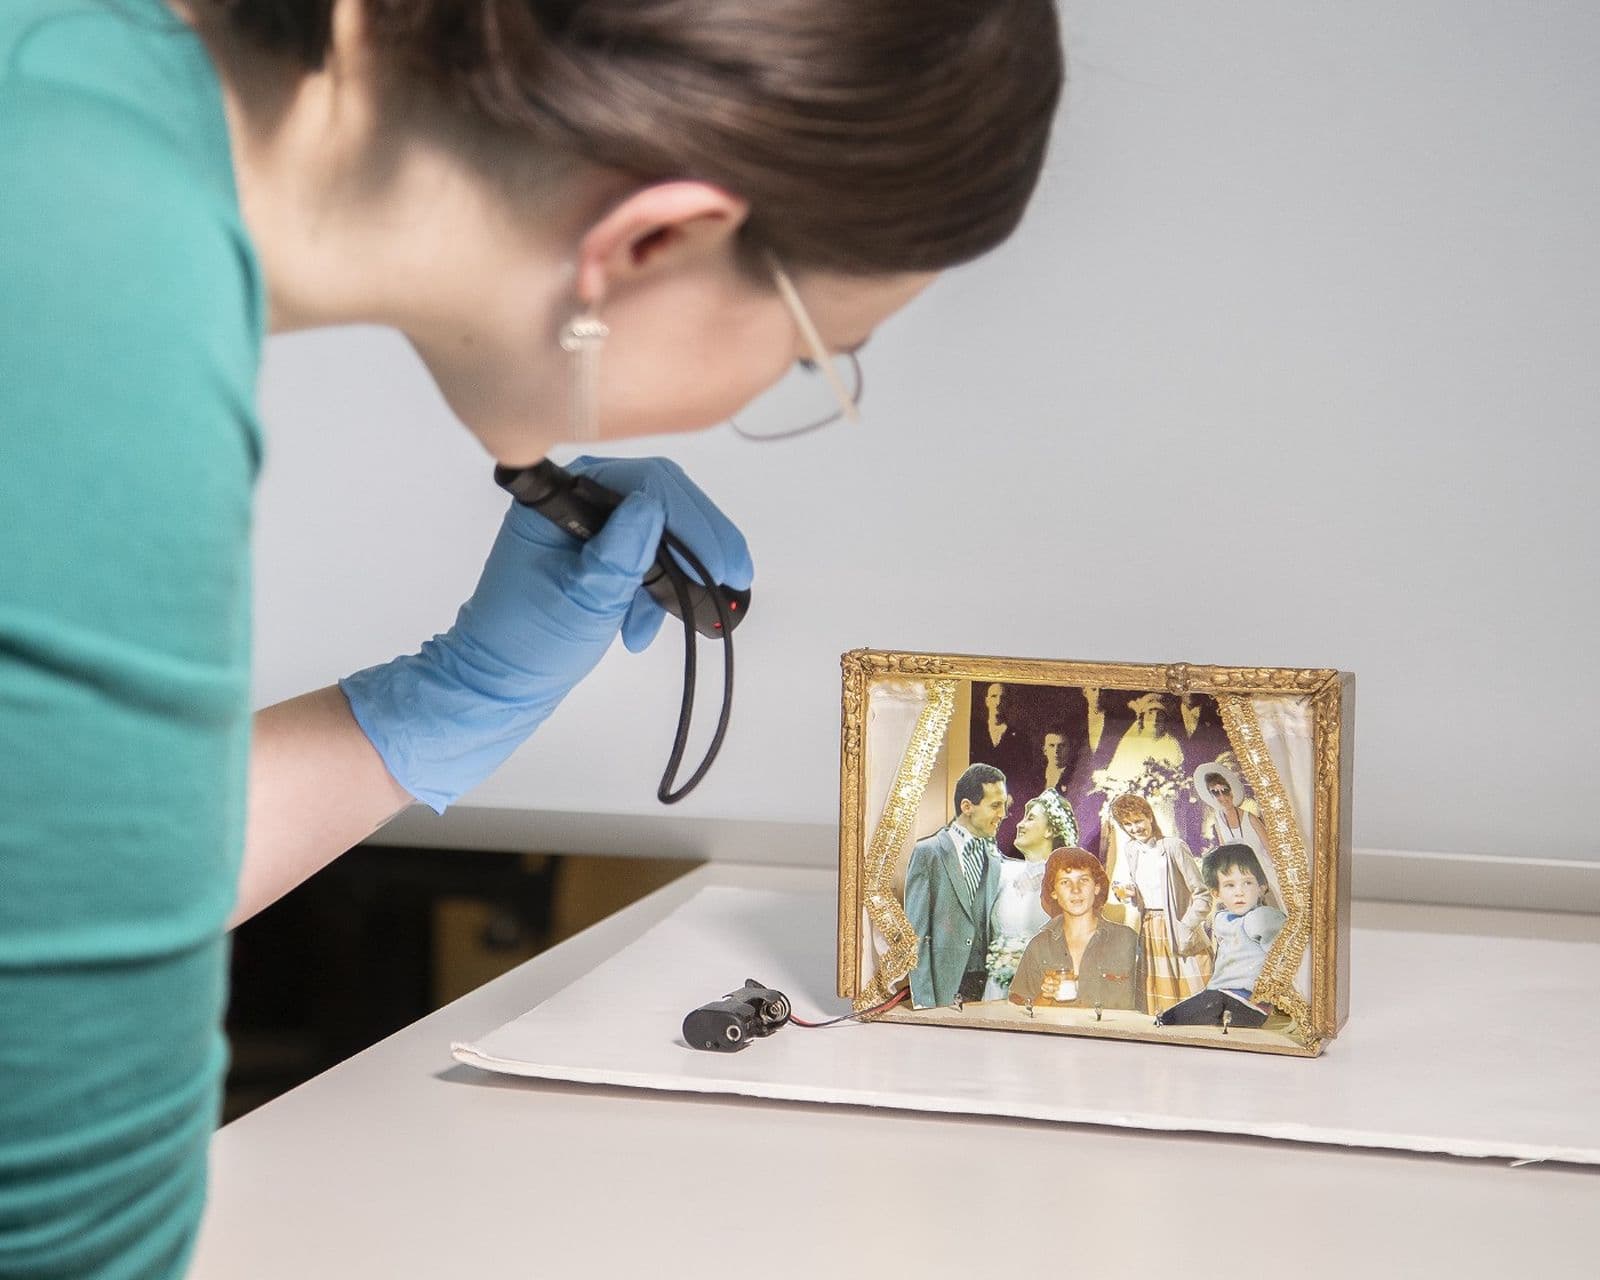 Photograph of conservator checking small object with light